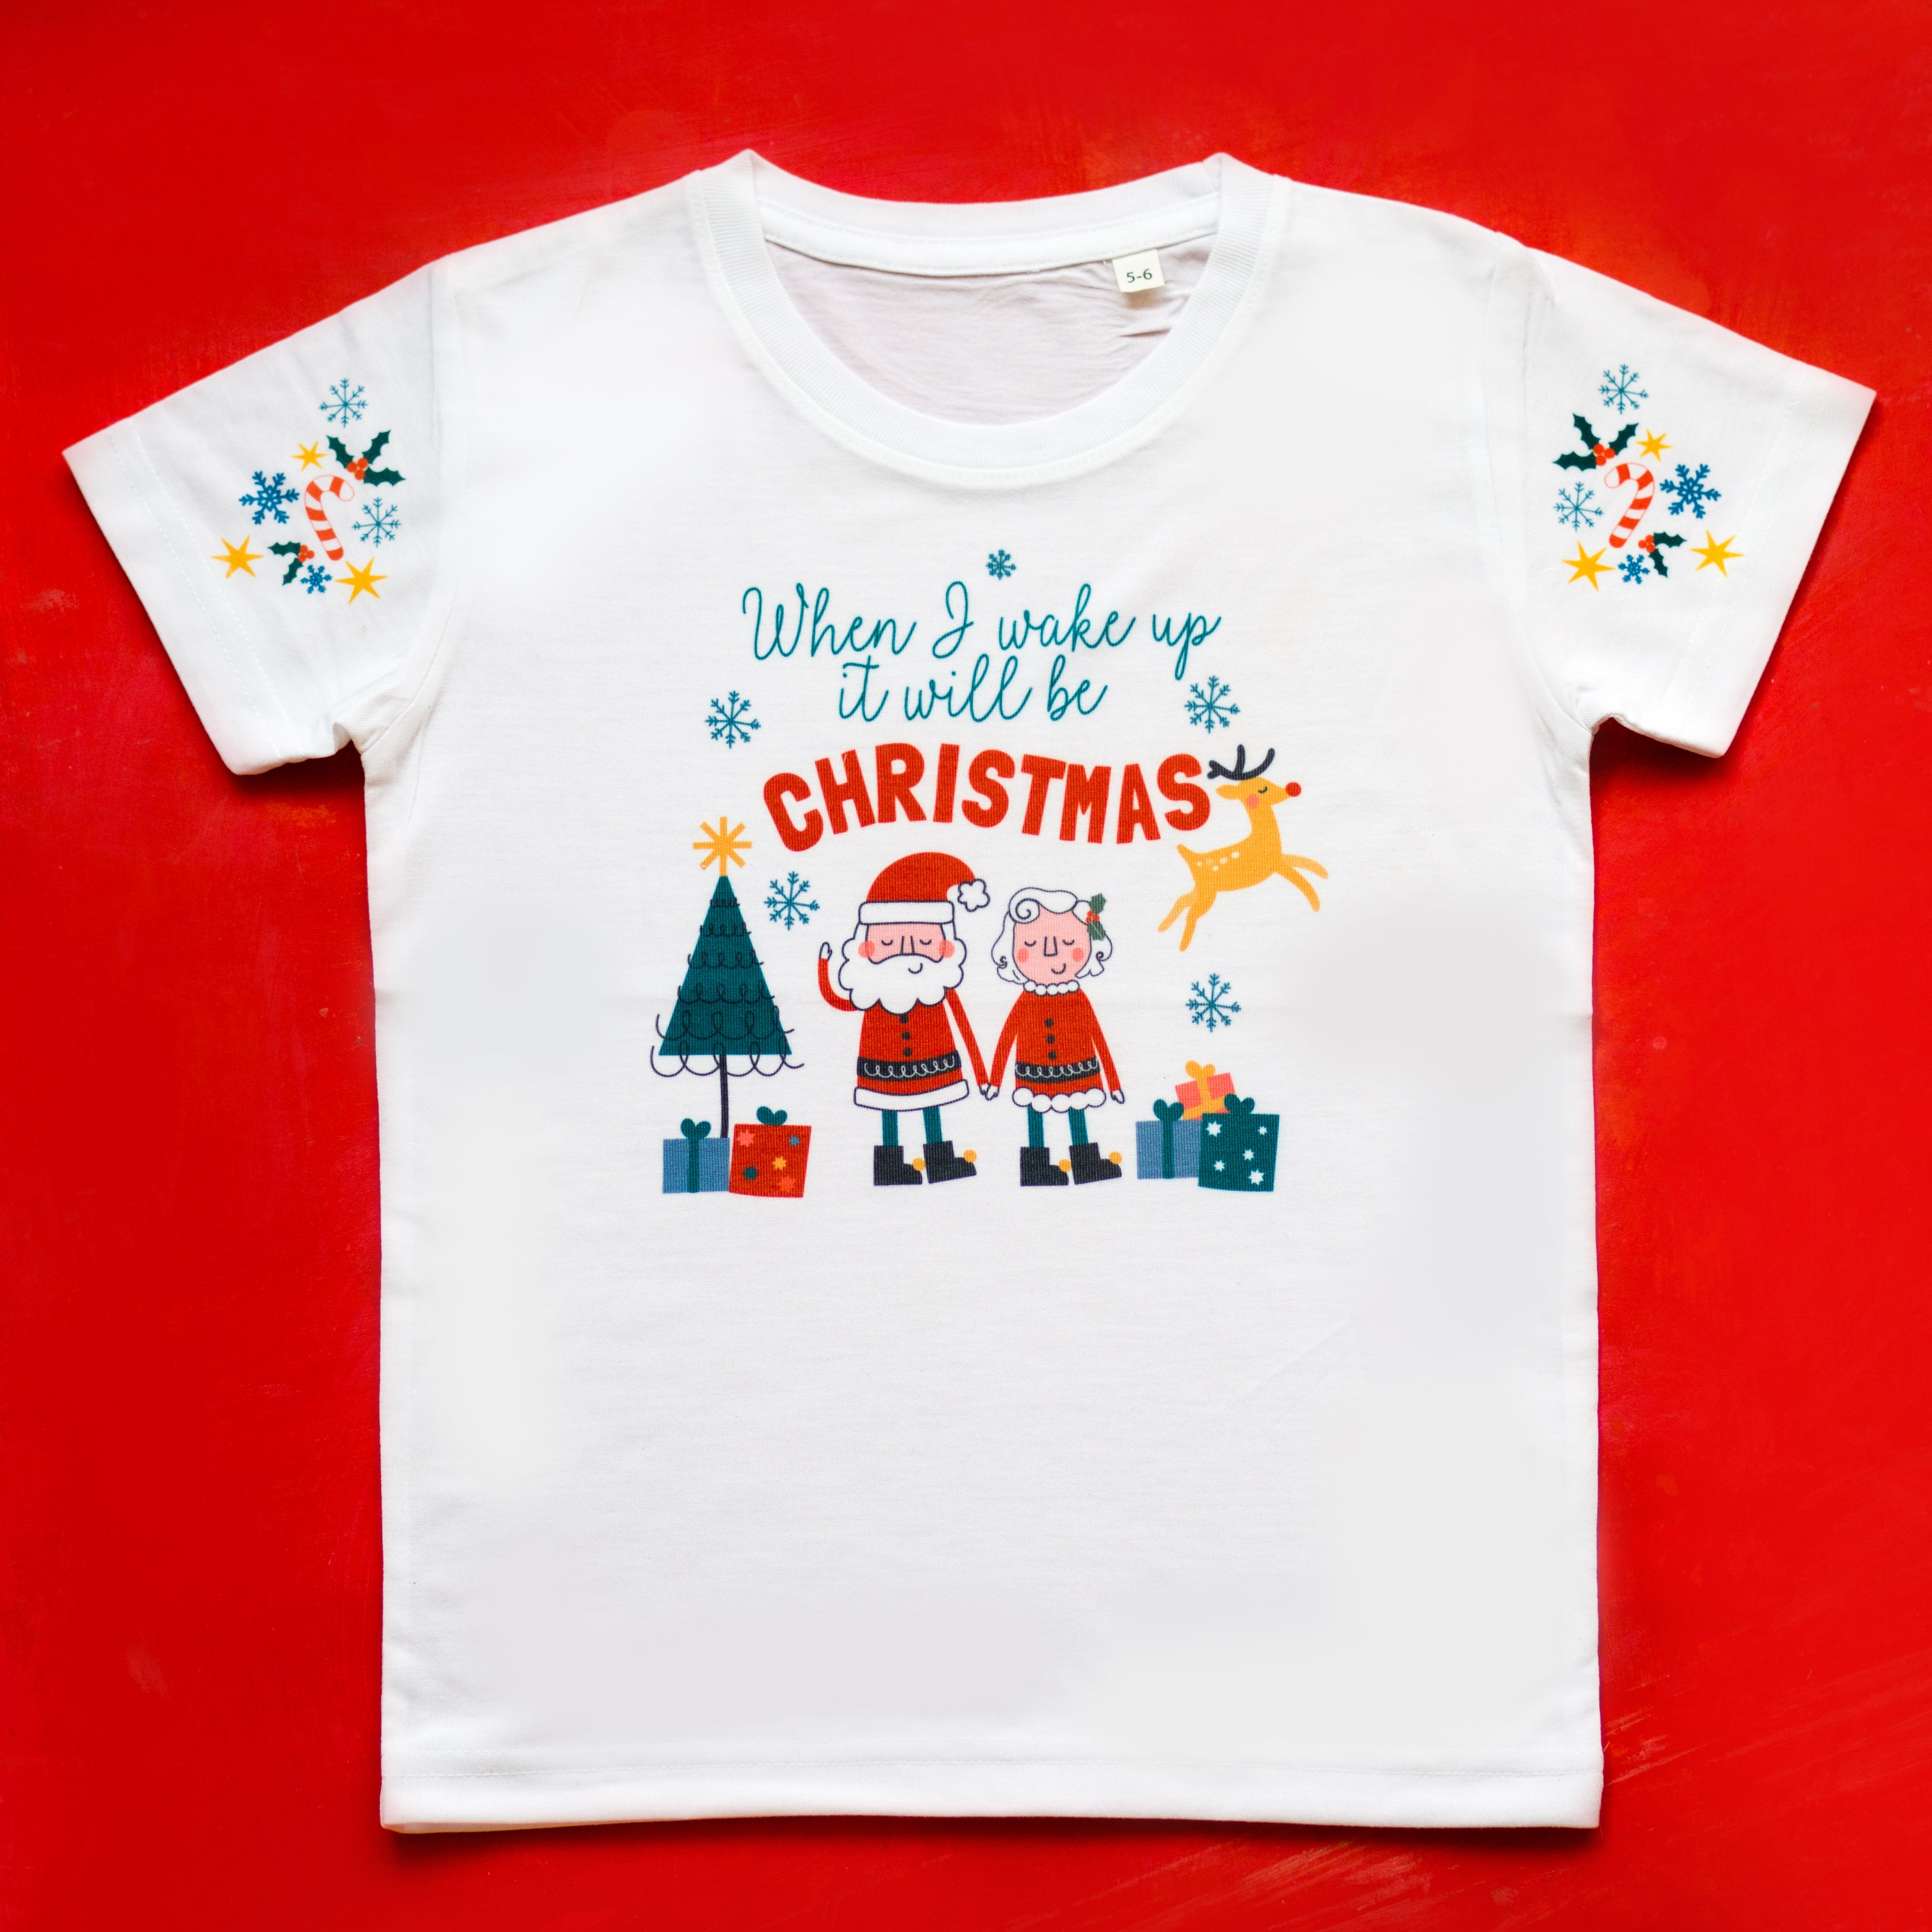 Mr and Mrs Clause 'When I Wake Up It Will Be Christmas' Tee